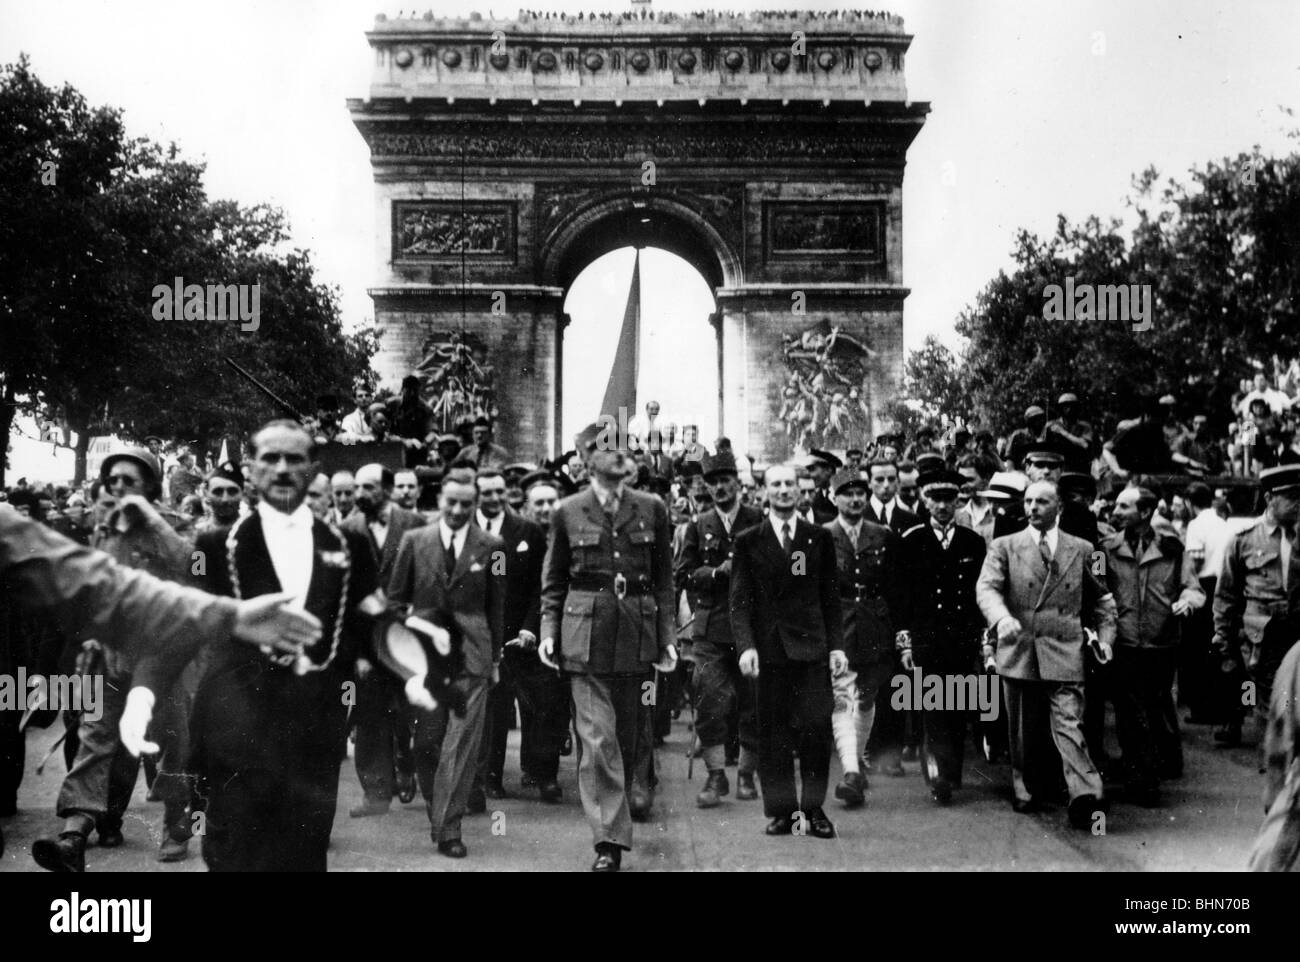 Gaulle, Charles de, 22.11.1890 - 9.11.1970, French general, politician, Leader of the Free French Forces 1940 - 1945, return to Paris, Champs Elysees, 26.8.1944, Stock Photo